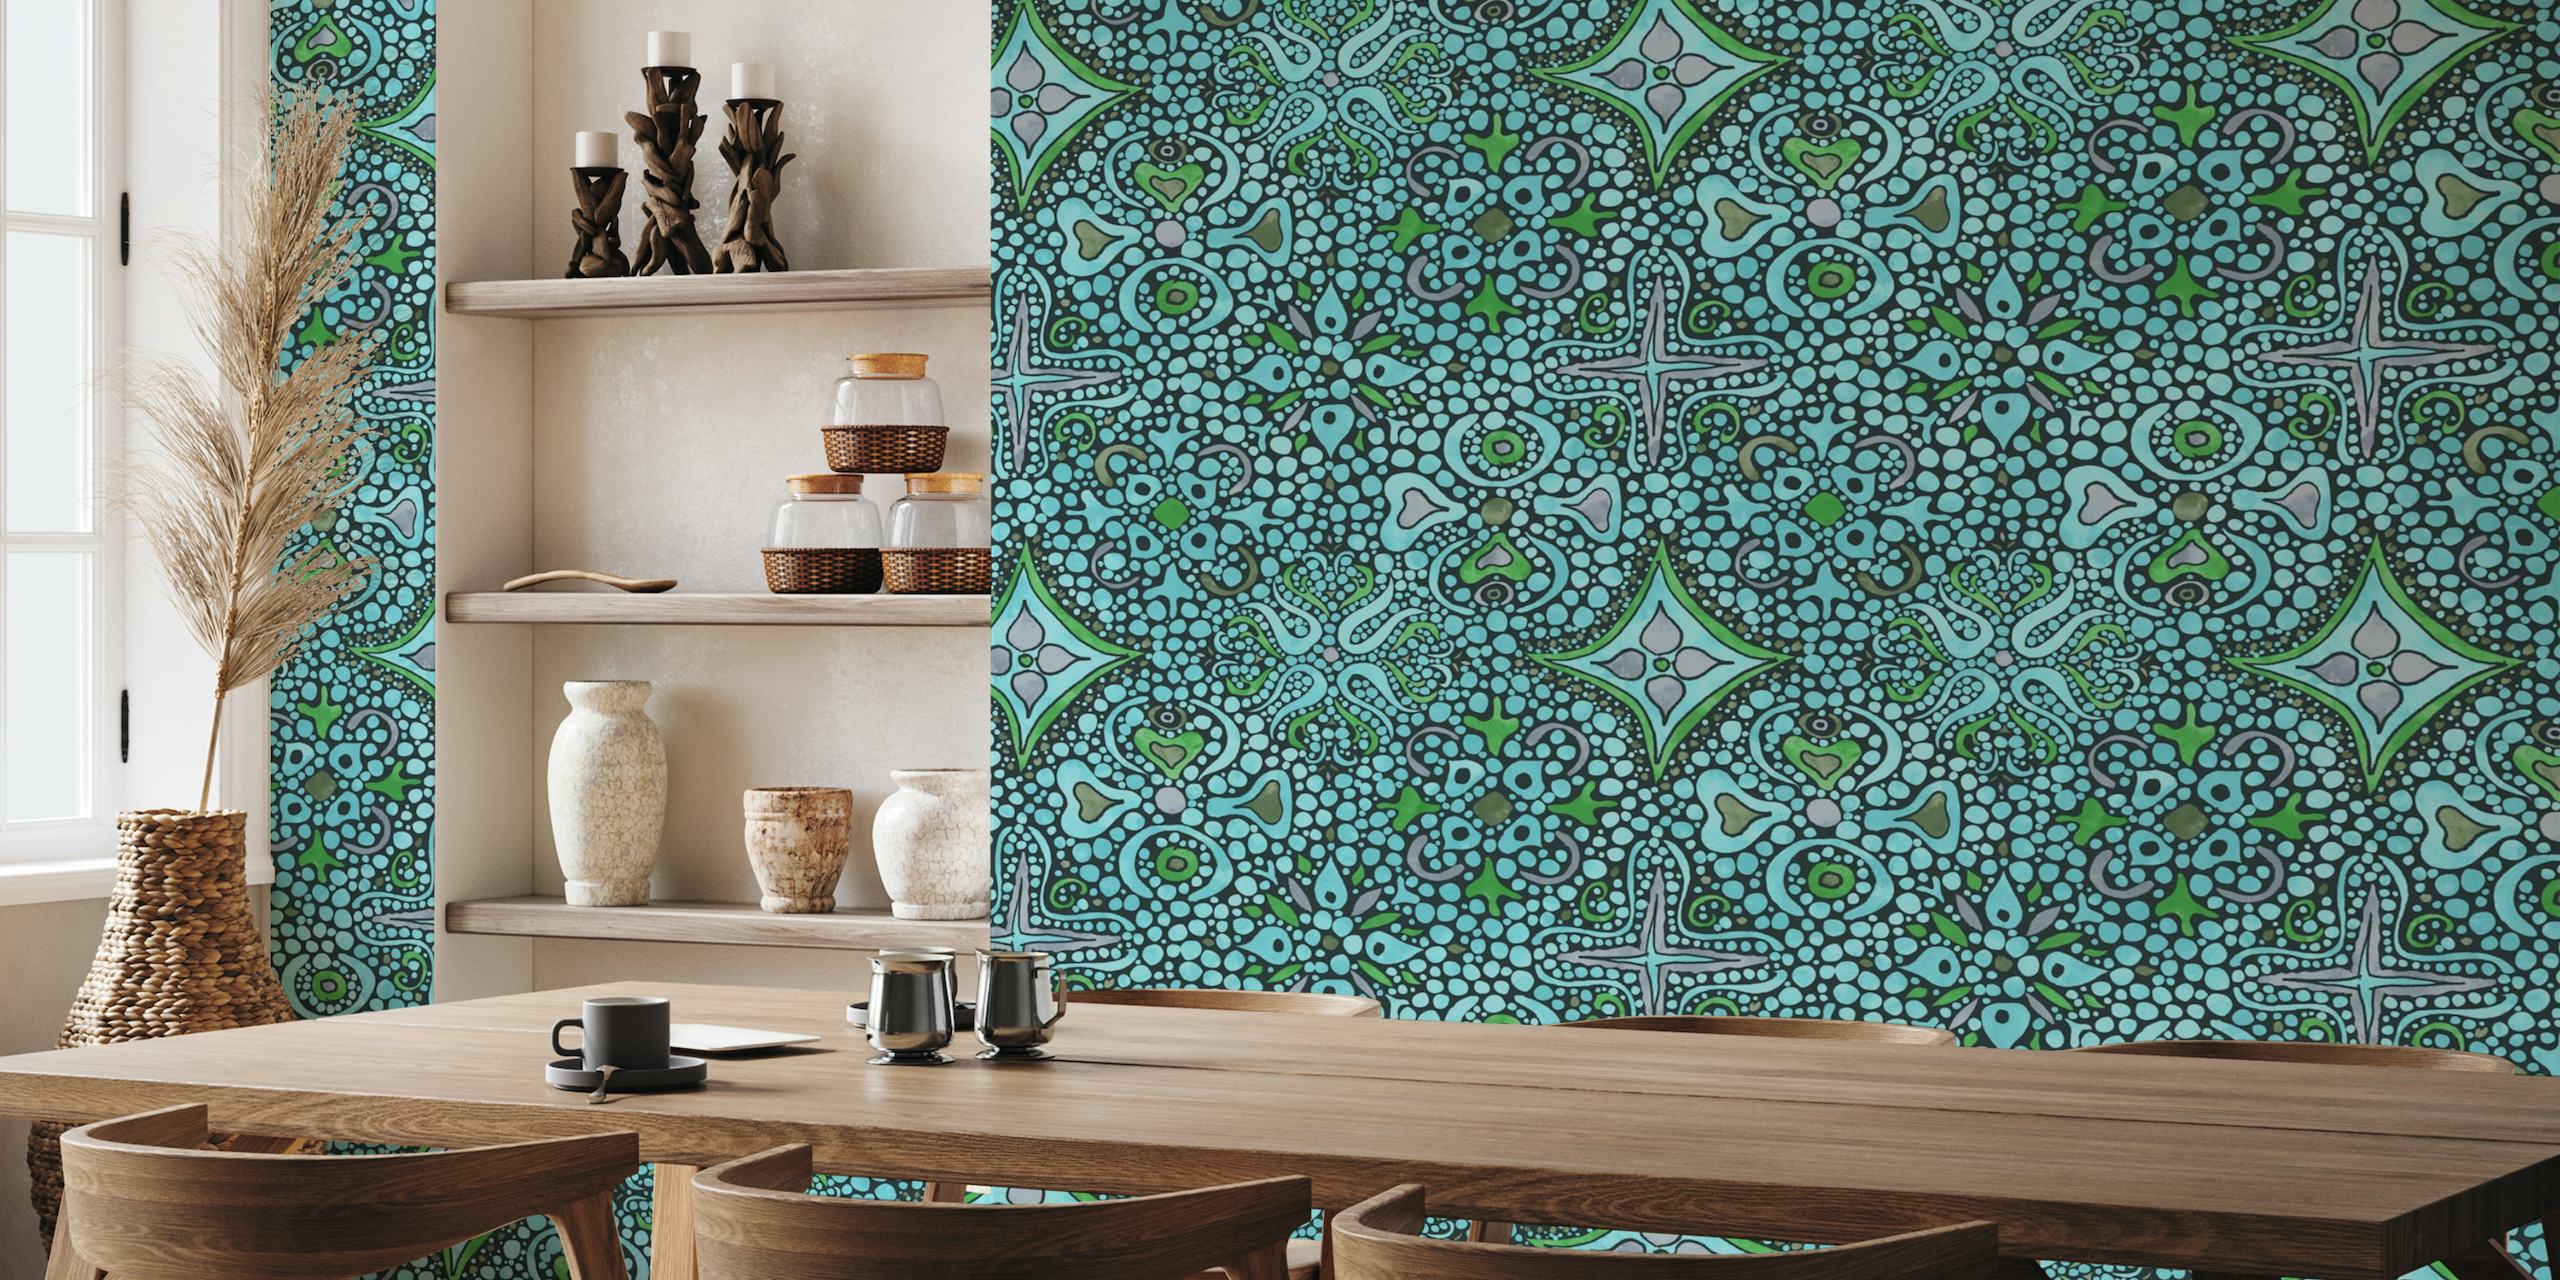 Teal mosaics with maximalist designs tapet